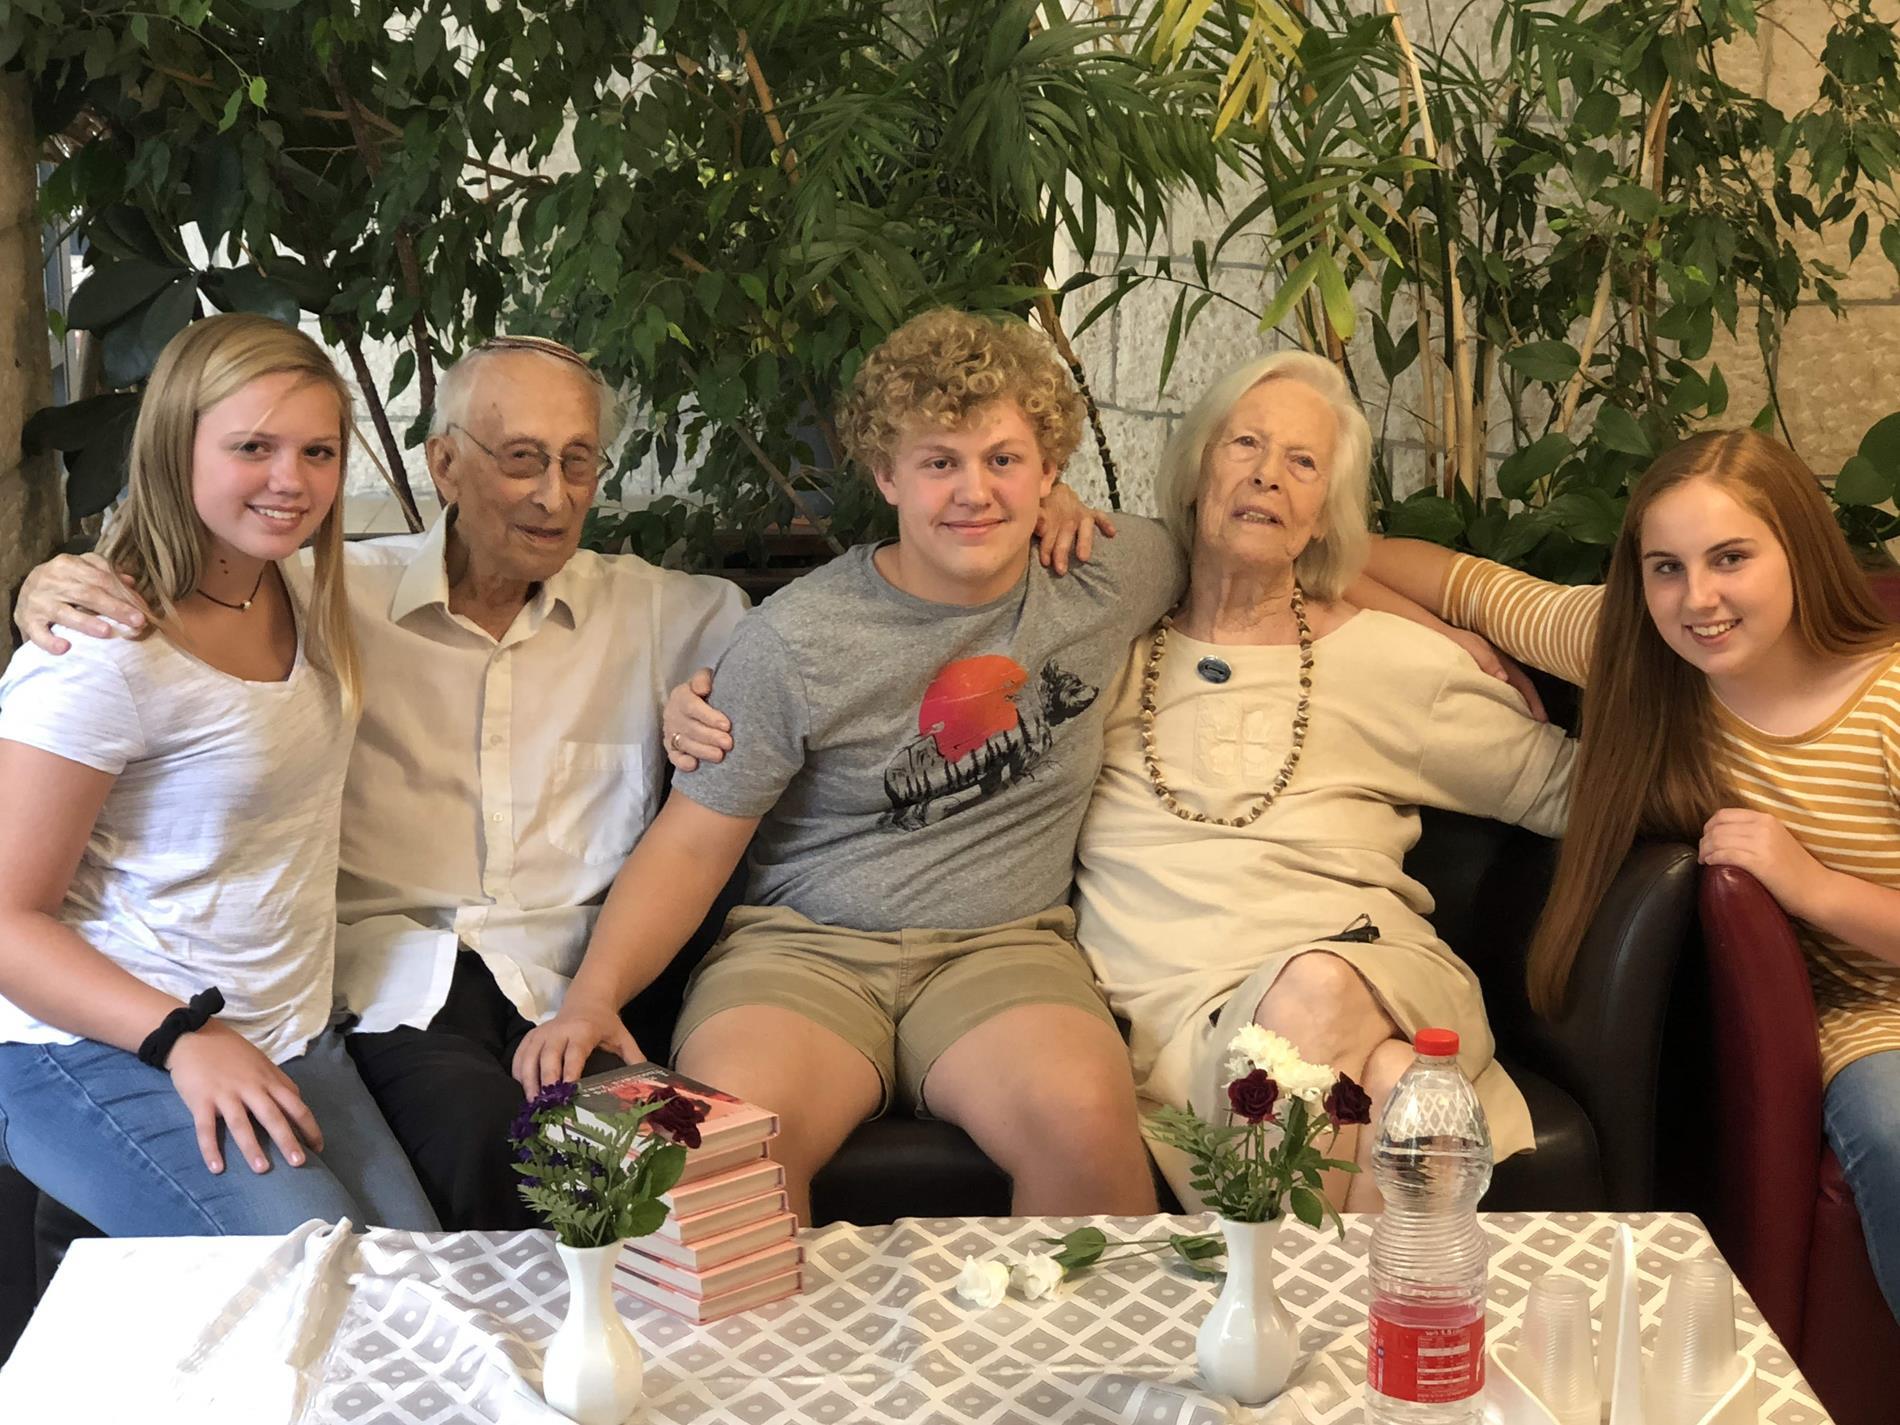 Students visit with survivor and author, Livia Bitton Jackson, and her husband in Israel